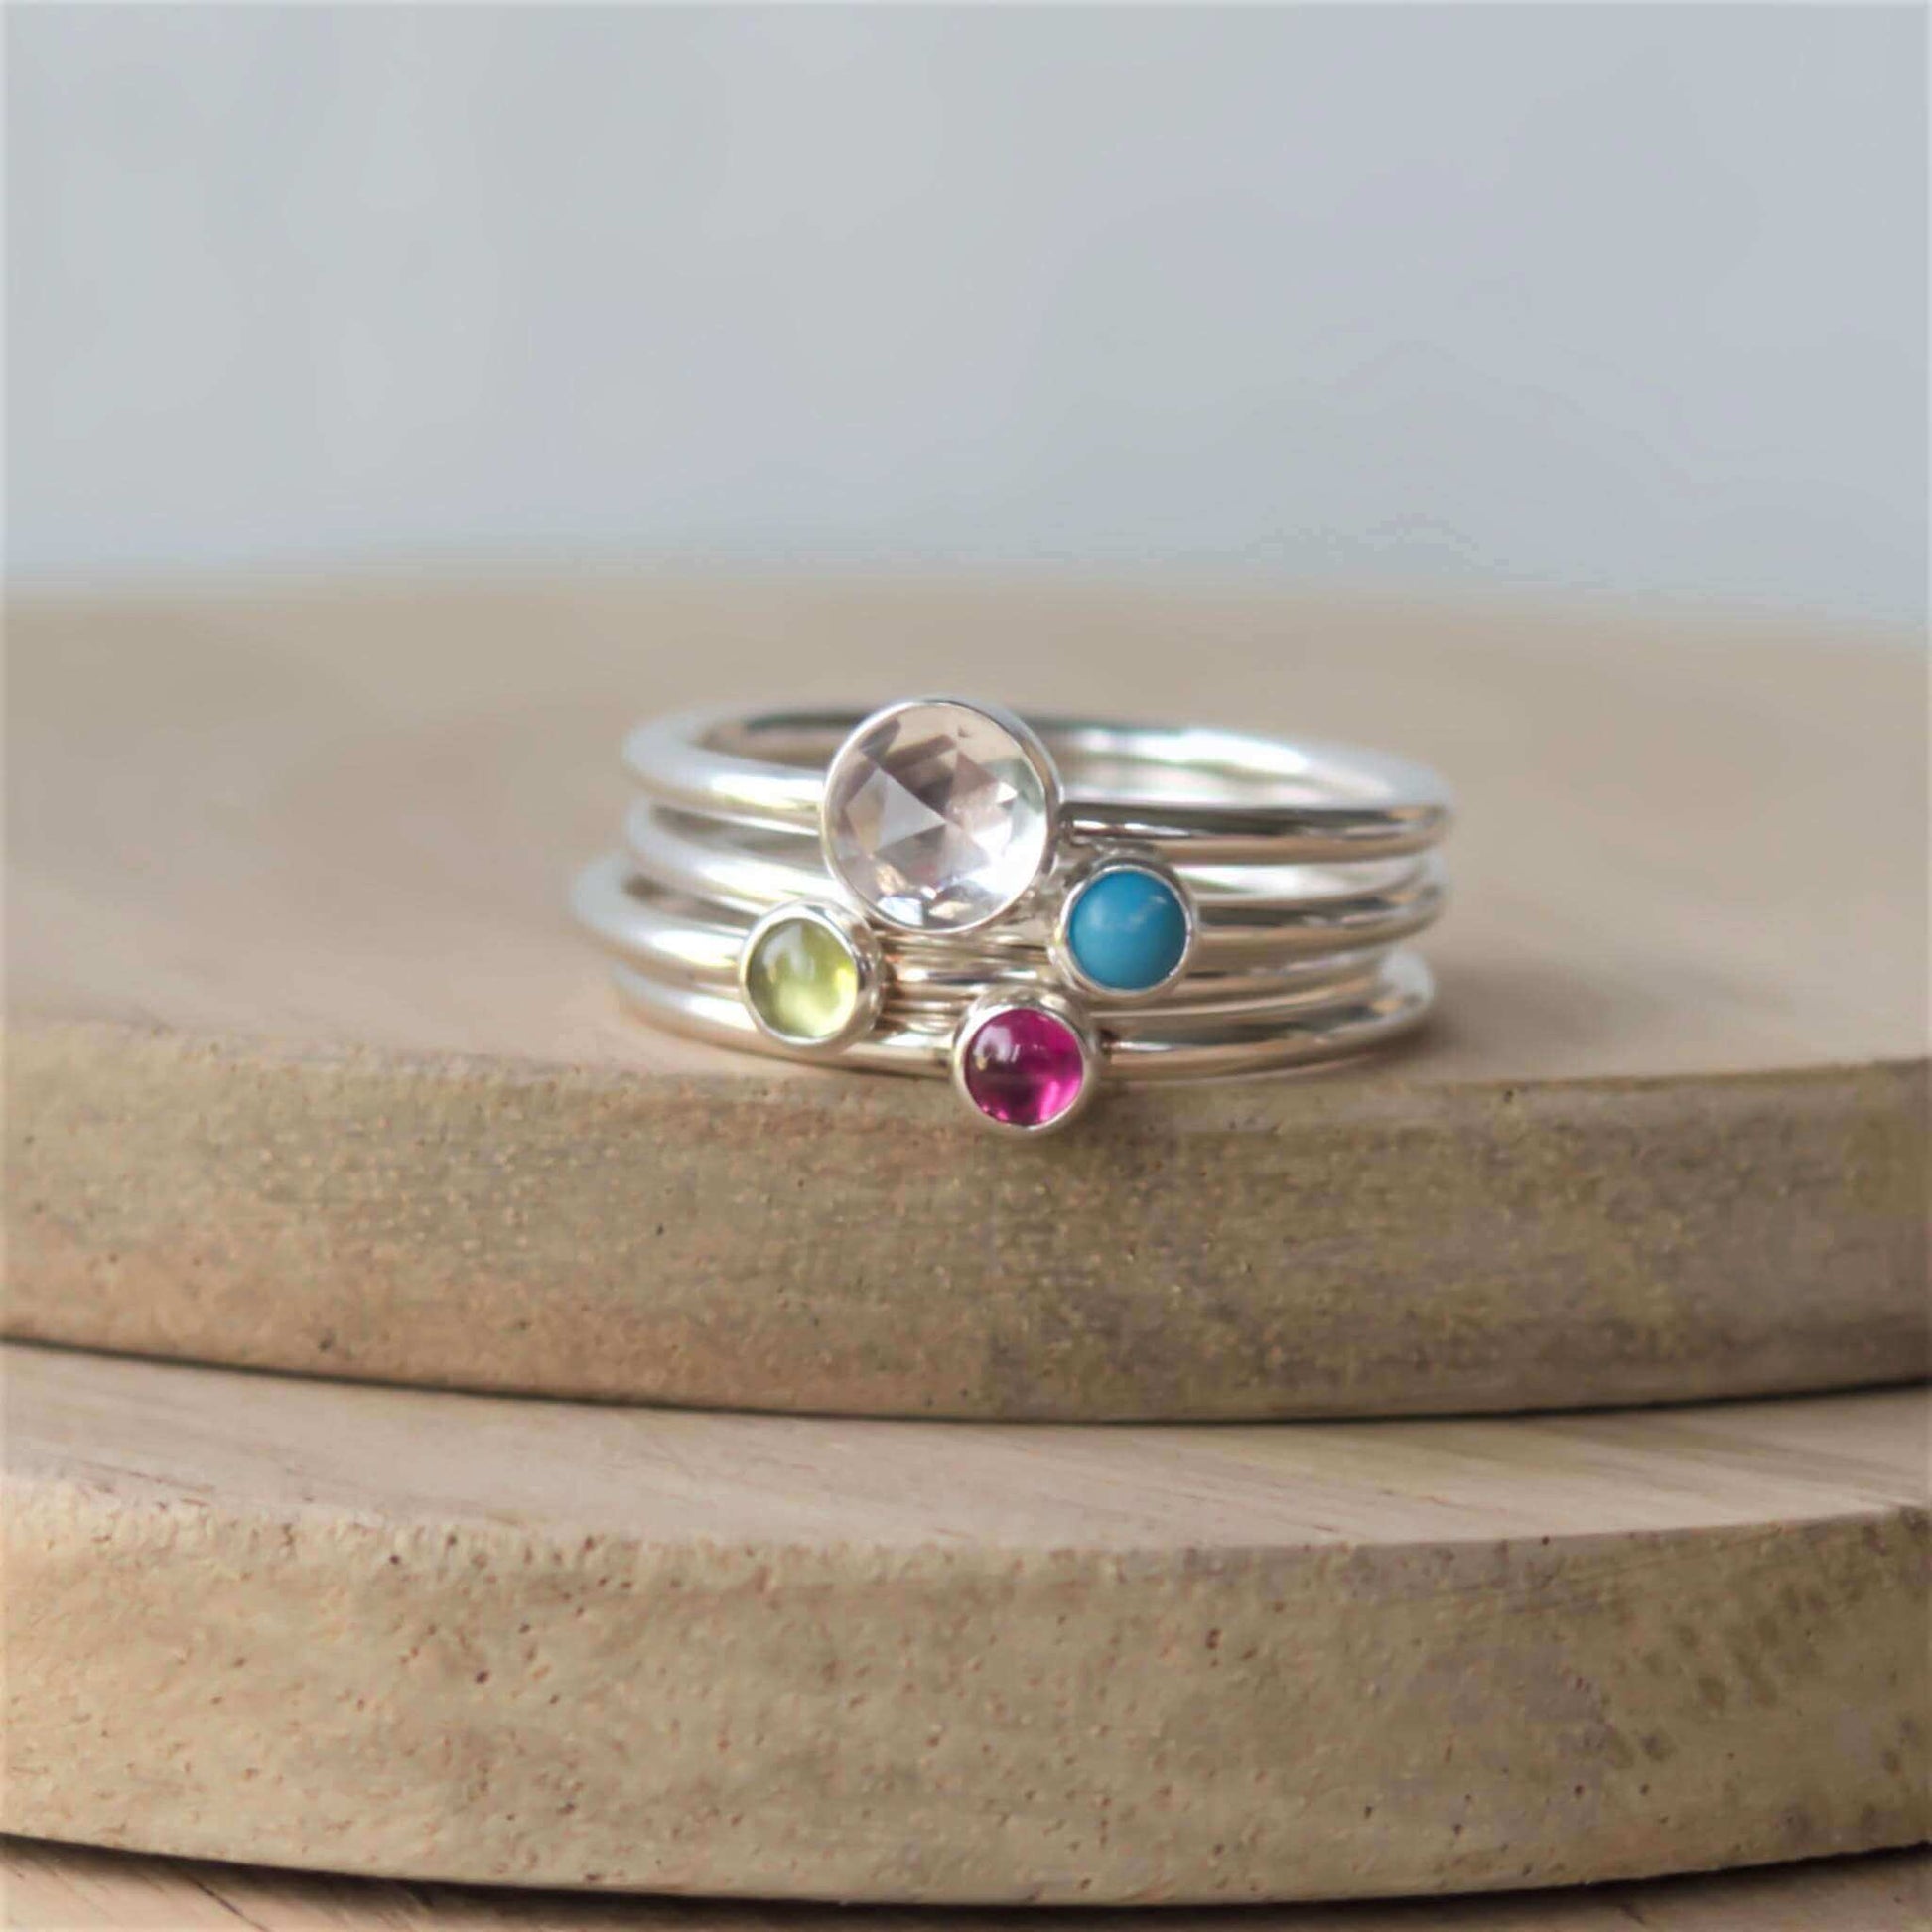 Four Birthstone ring set with April Main Birthstone, White Topaz, and any other three birthstones. The stones in the image are a 3mm peridot, Turquoise, and Lab Ruby . Four separate rings all in Sterling Silver, and handmade in Edinburgh by Maram Jewellery